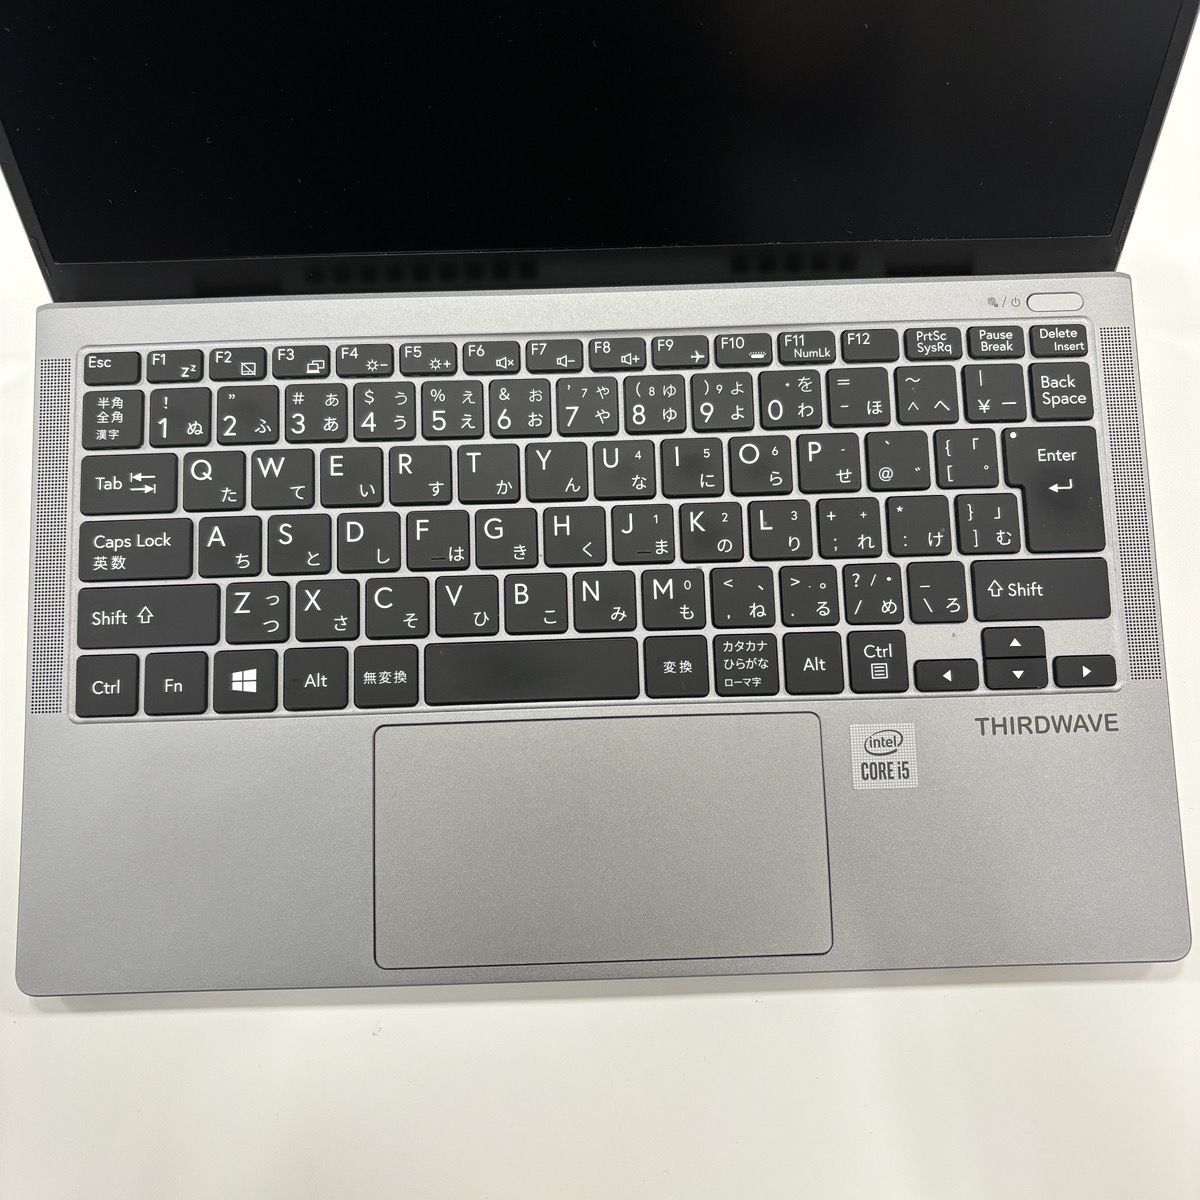 PC.1 jpy [ Junk ] THIDWAVE F-14IC 722905-63824 Core i5-1035G1 memory 16GB 14 -inch T010581[ translation have ]